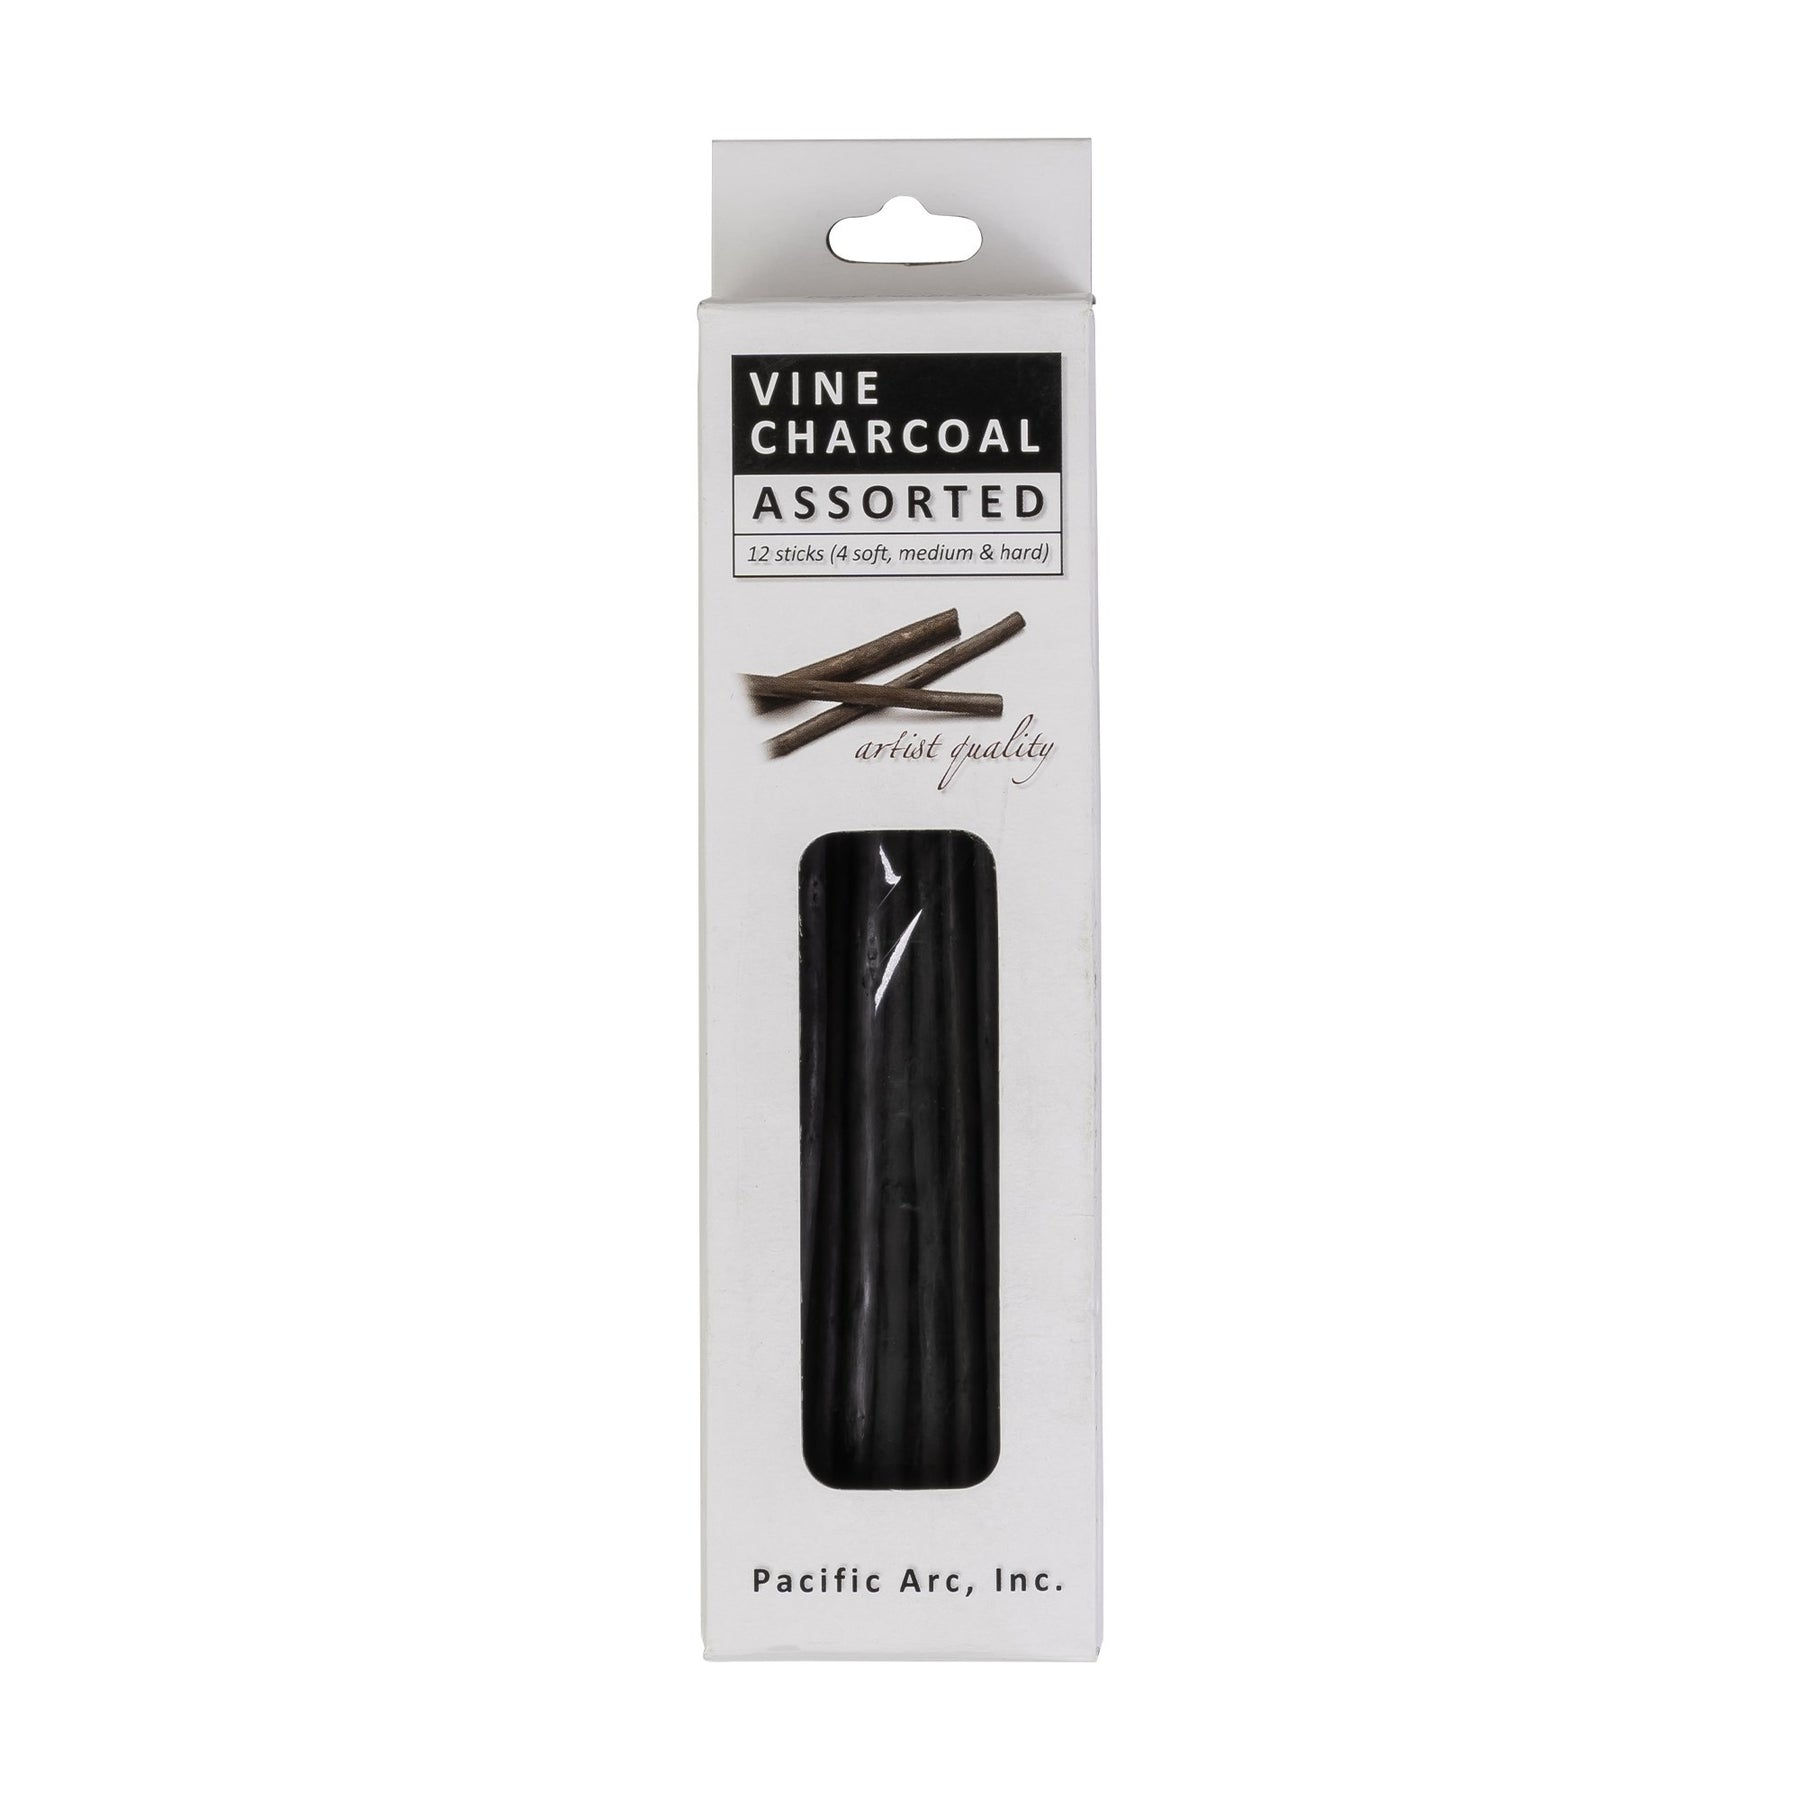 CHARCOAL PURE WILLOW VINE CHARCOAL BOX OF 5 STICKS GP57C